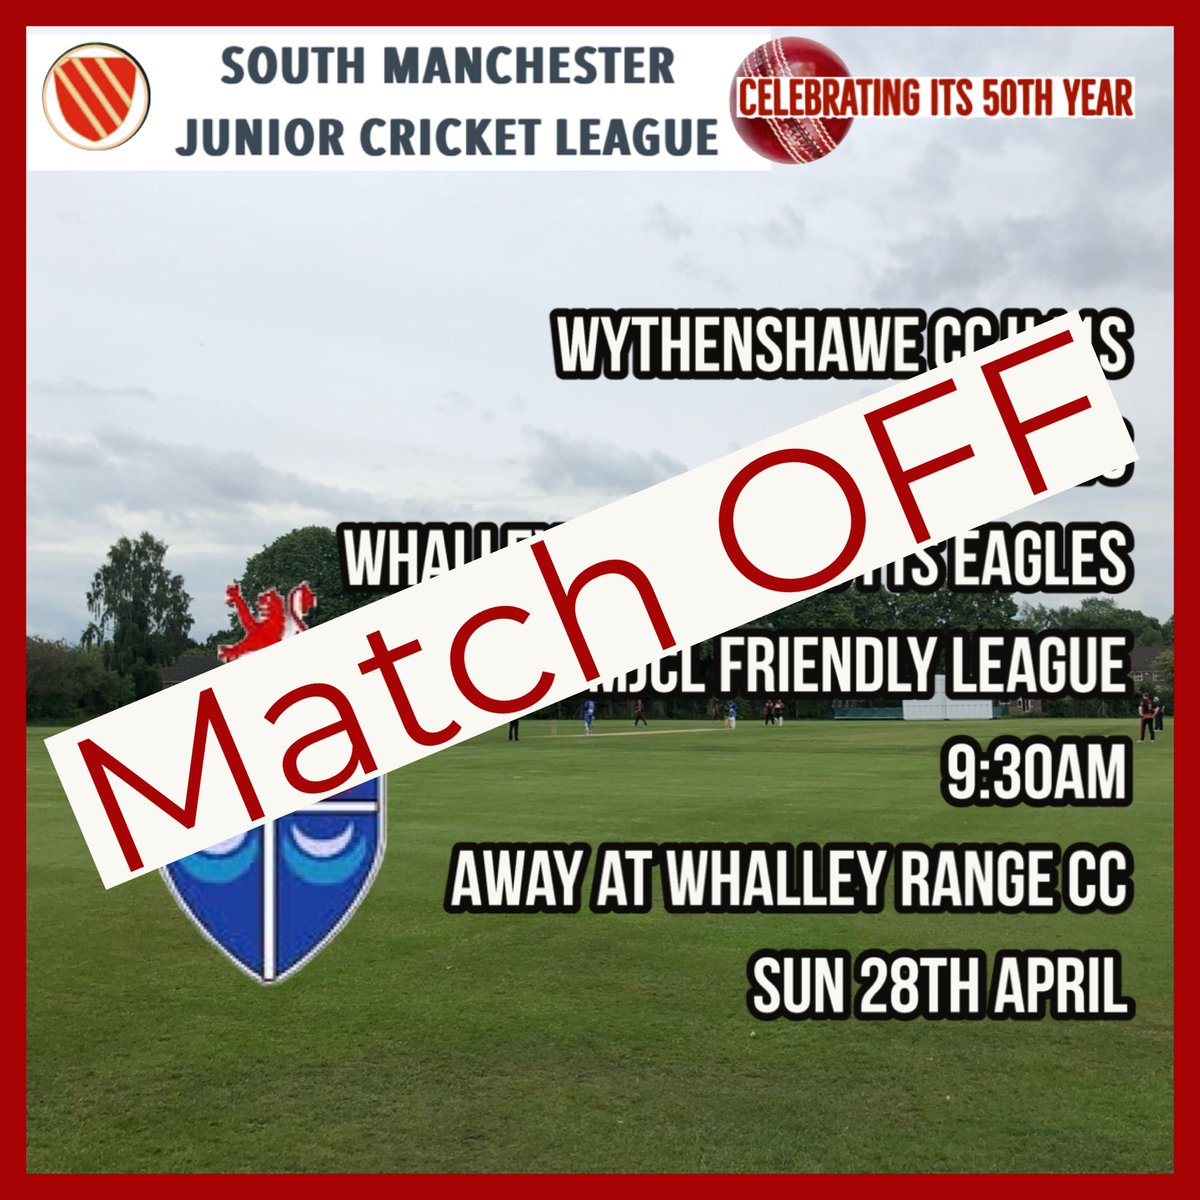 Sadly & as expected, todays away @smanjcl friendly league match for our U11s vs @WhalleyRangeCC Eagles at Whalley Range CC has succumbed to the weather…match OFF 🌧️ ☔️